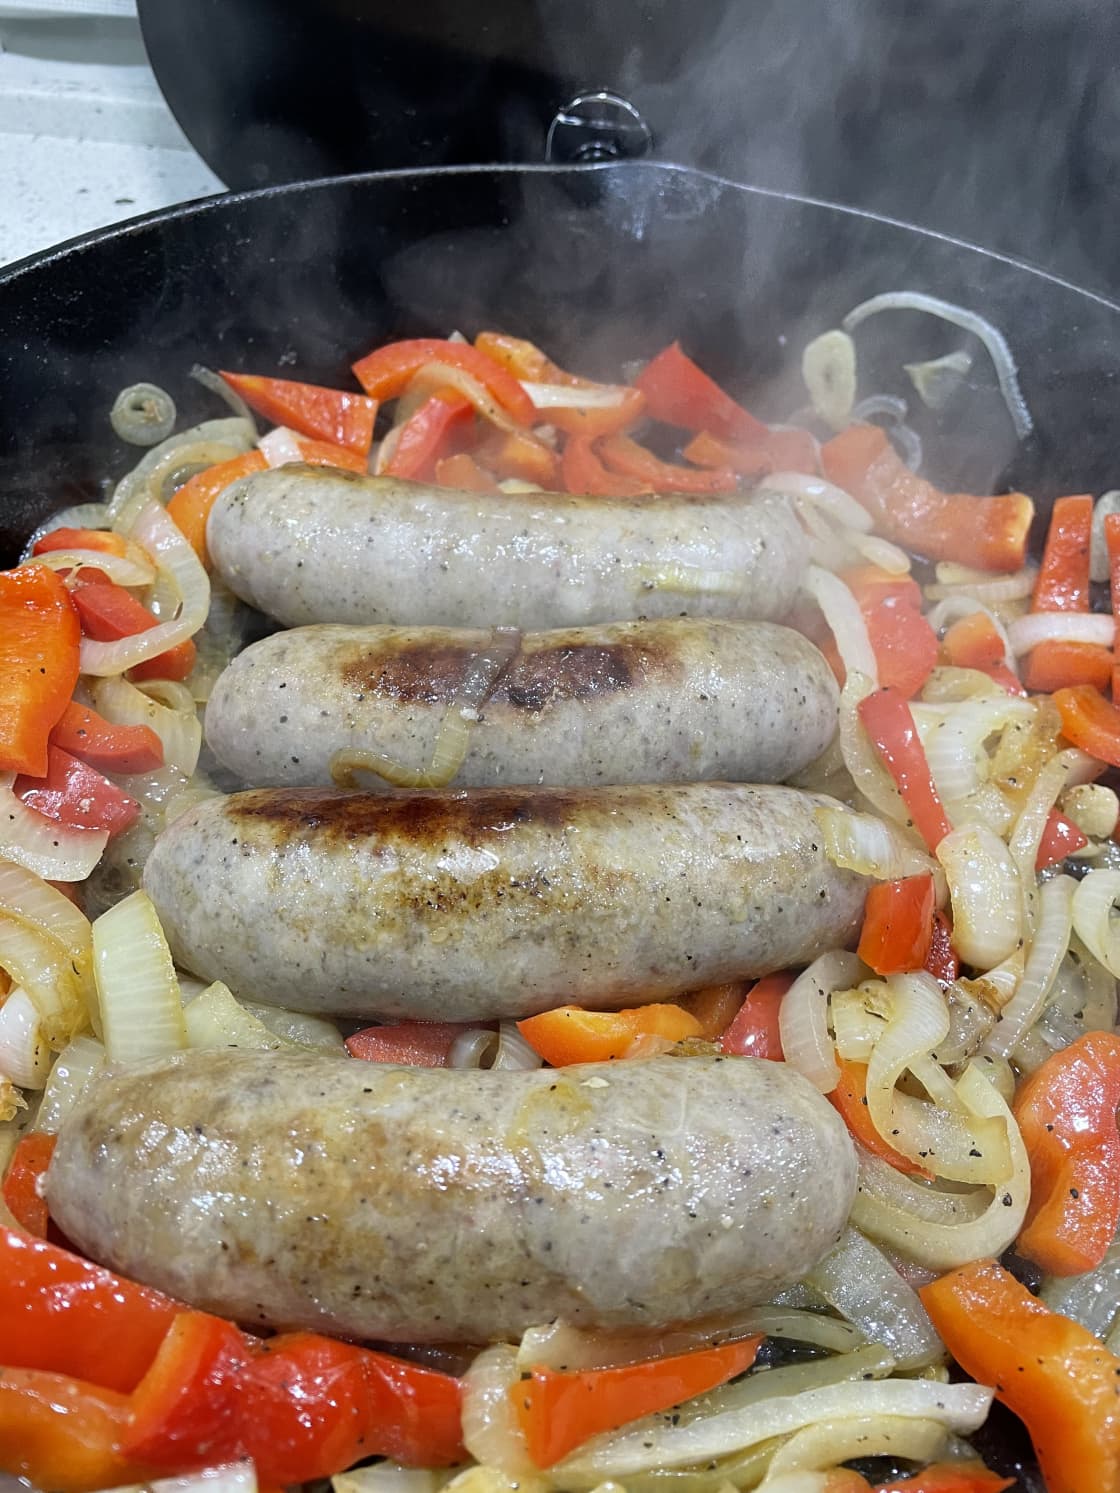 Delicious sausage from Catherine’s farm!  Will be ordering more!